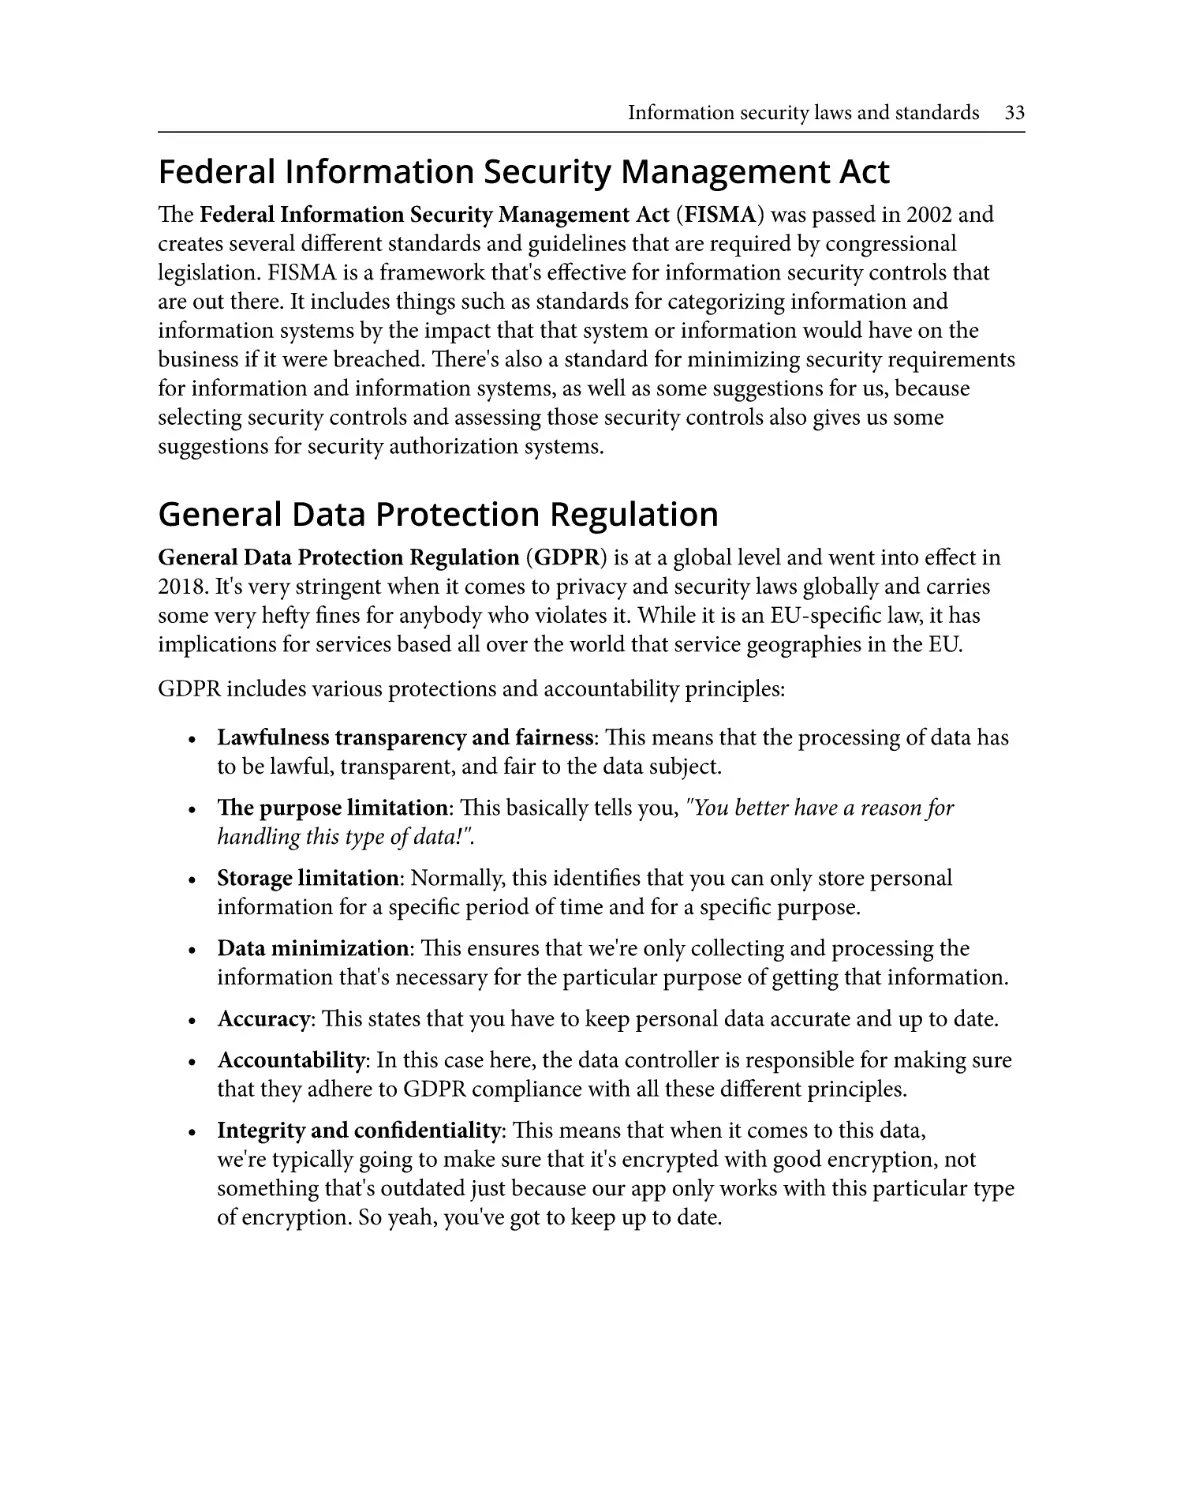 Federal Information Security Management Act
General Data Protection Regulation